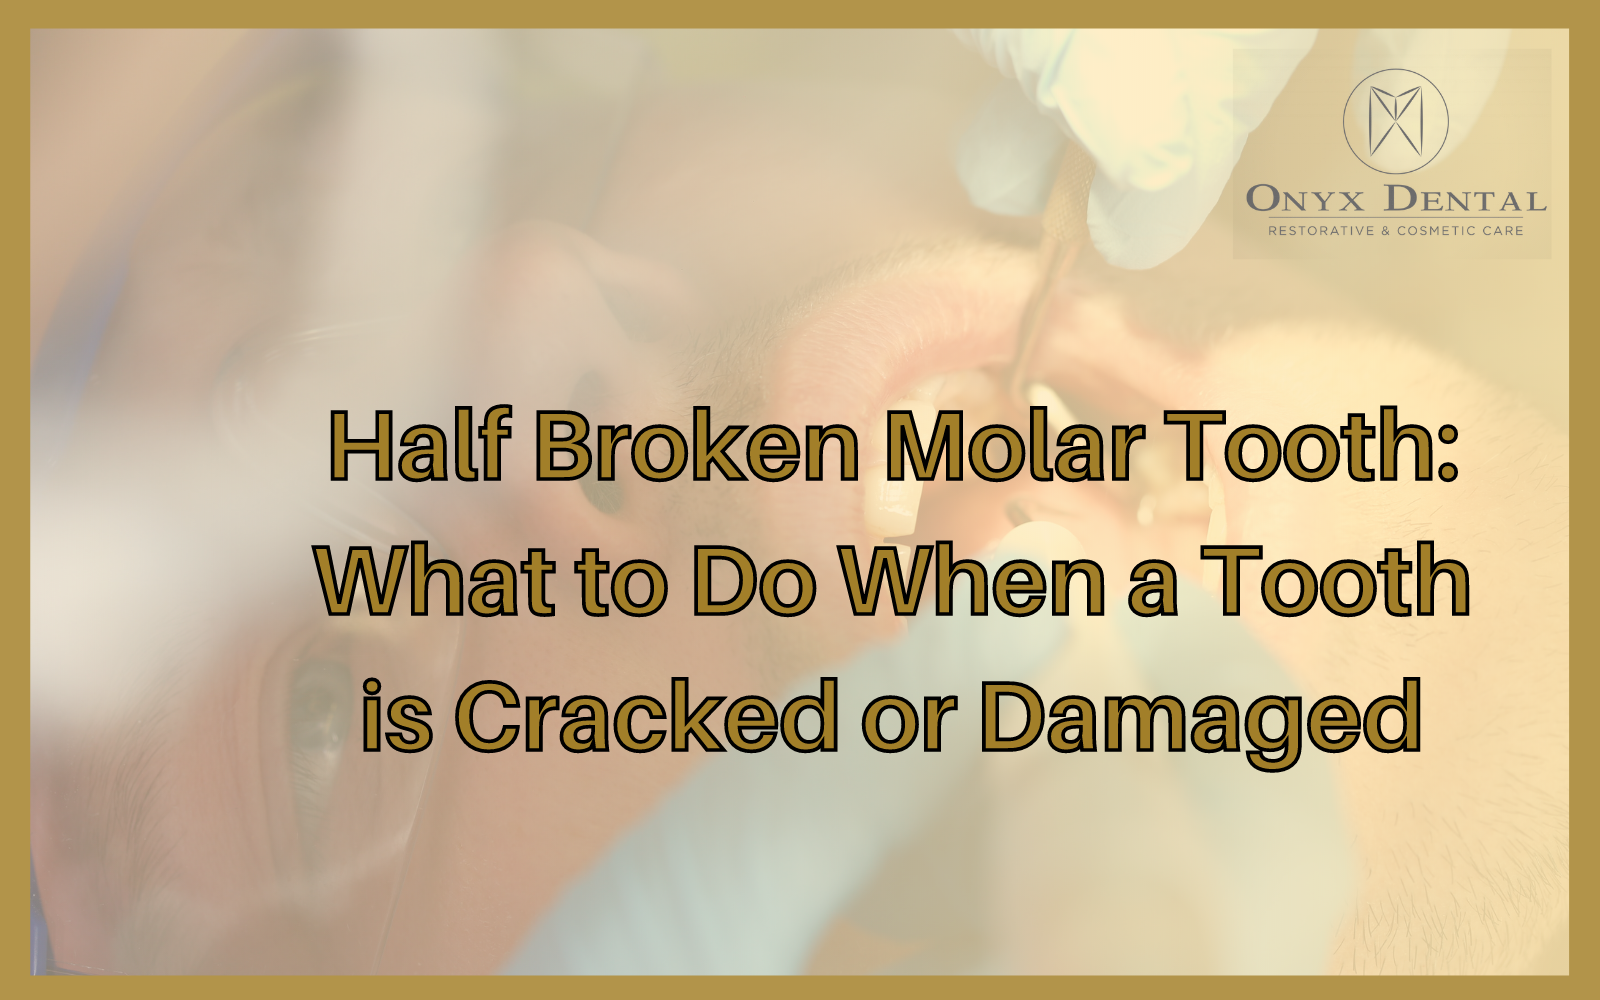 Half Broken Molar Tooth What to Do When a Tooth is Cracked or Damaged